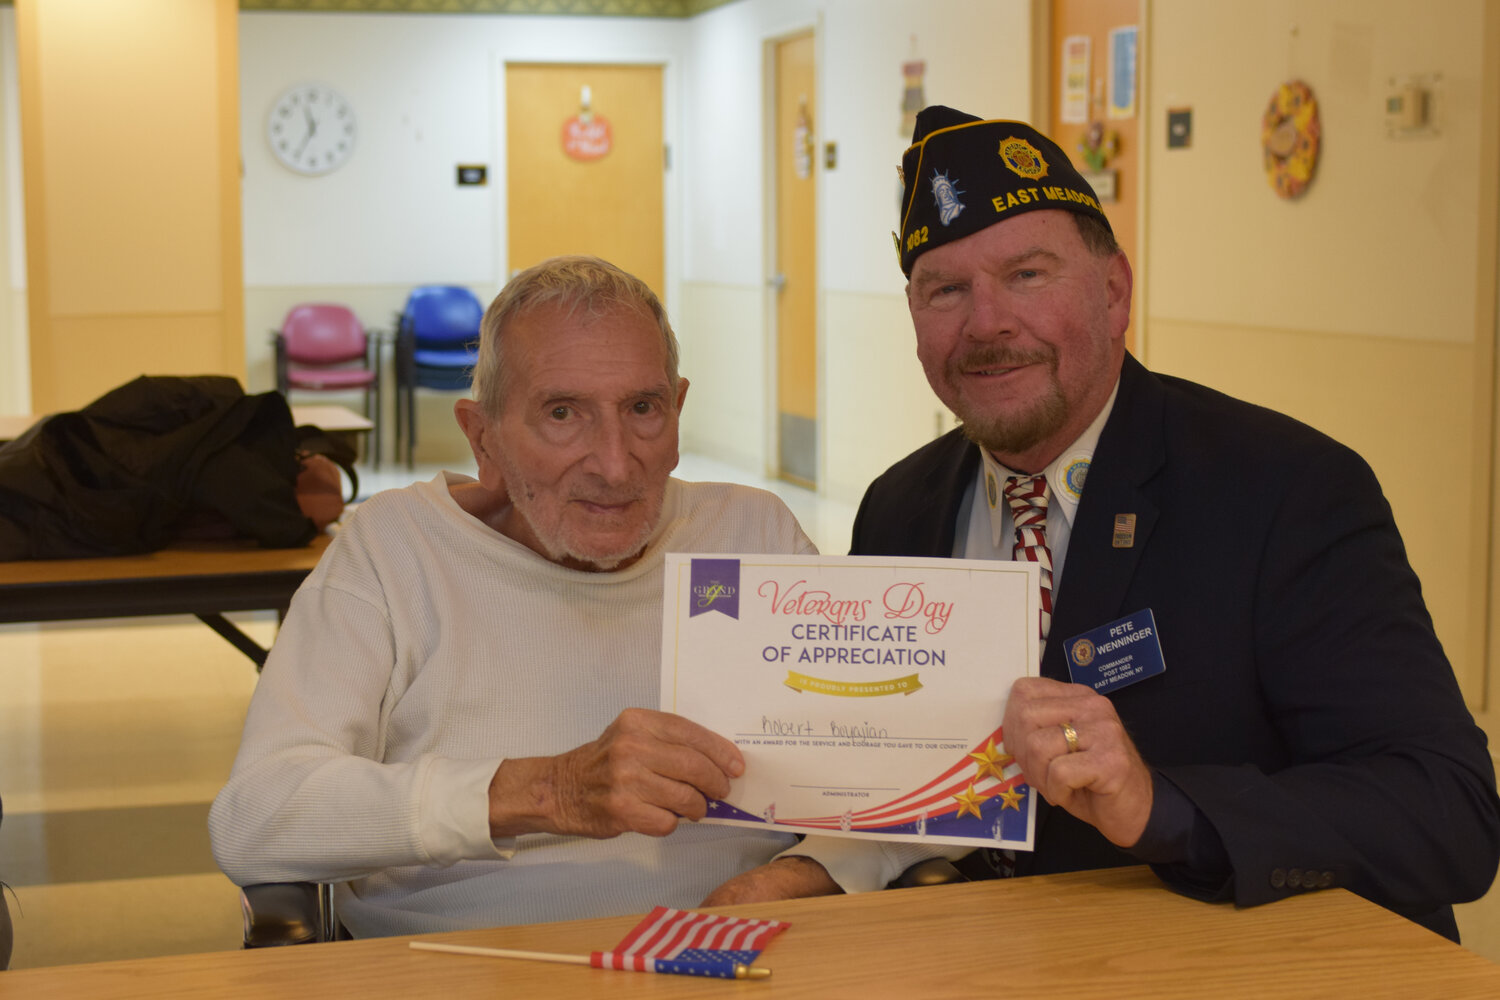 At Fulton Commons Care Center on Merrick Avenue in East Meadow, Pete Wenninger, right, of the American Legion thanked fellow veteran Robert Boyajian.